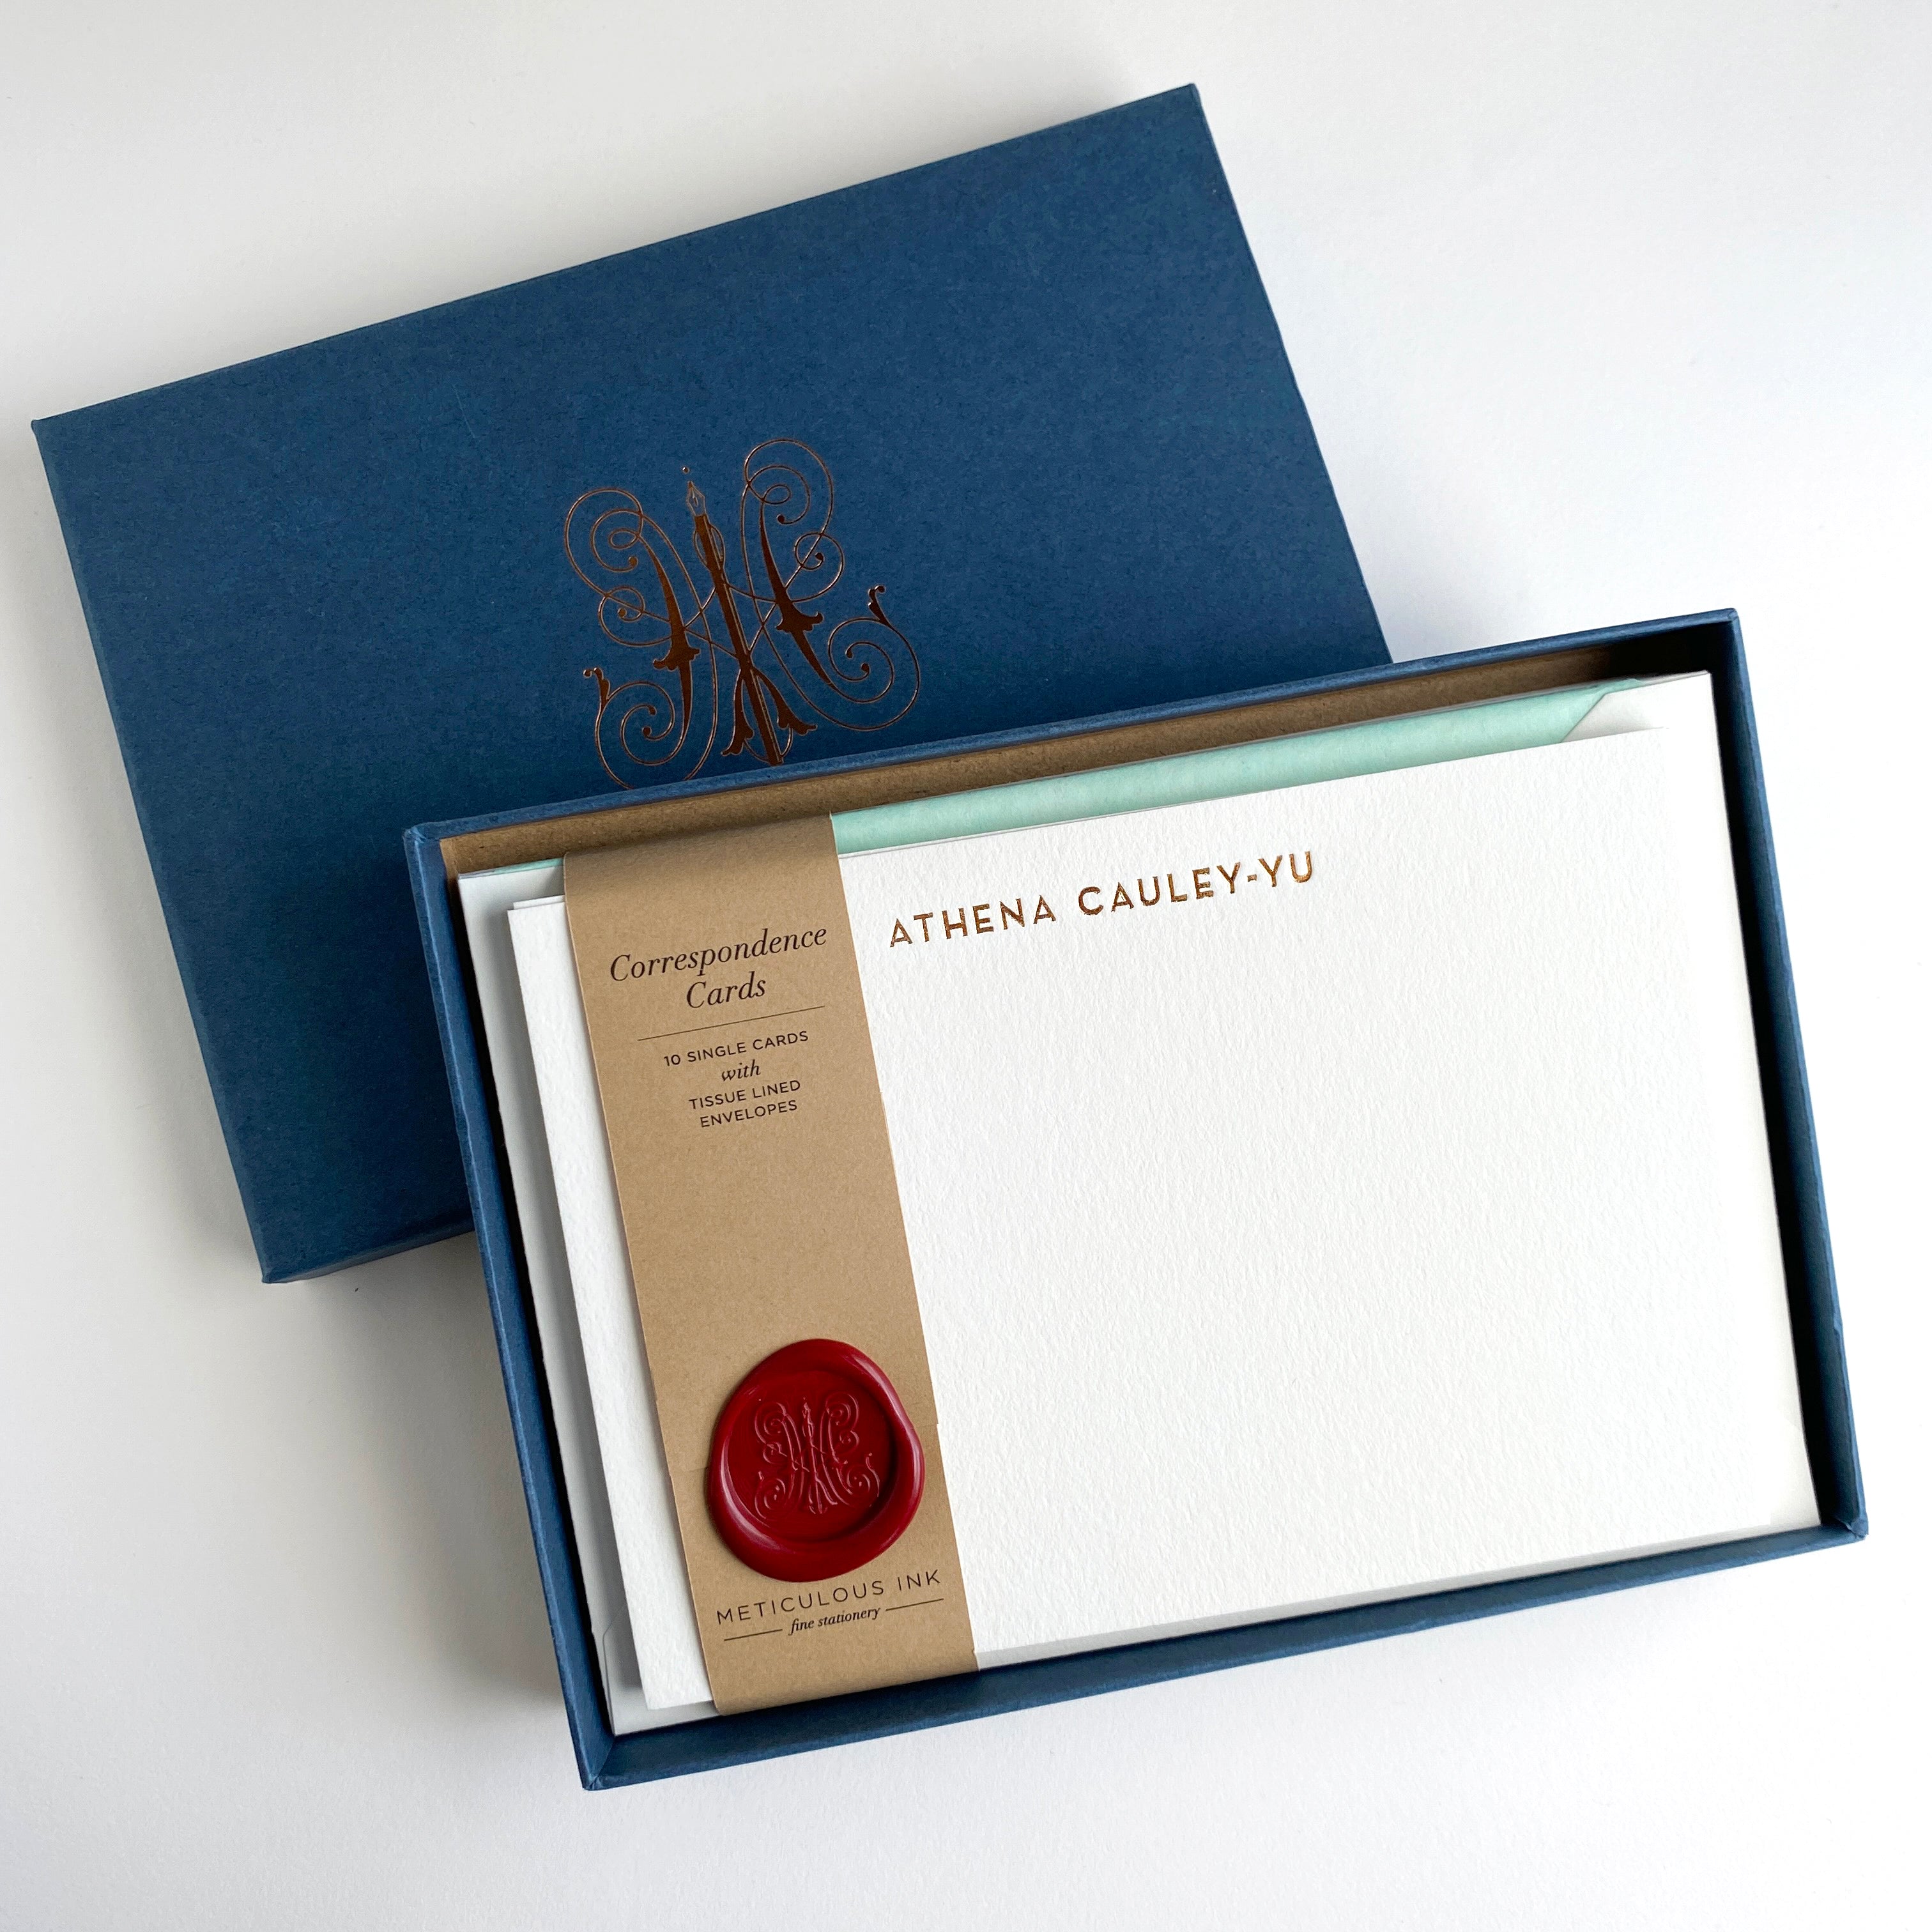 Copper / Gold Foiled A5 Correspondence Cards in Meticulous Ink box set with red wax seal